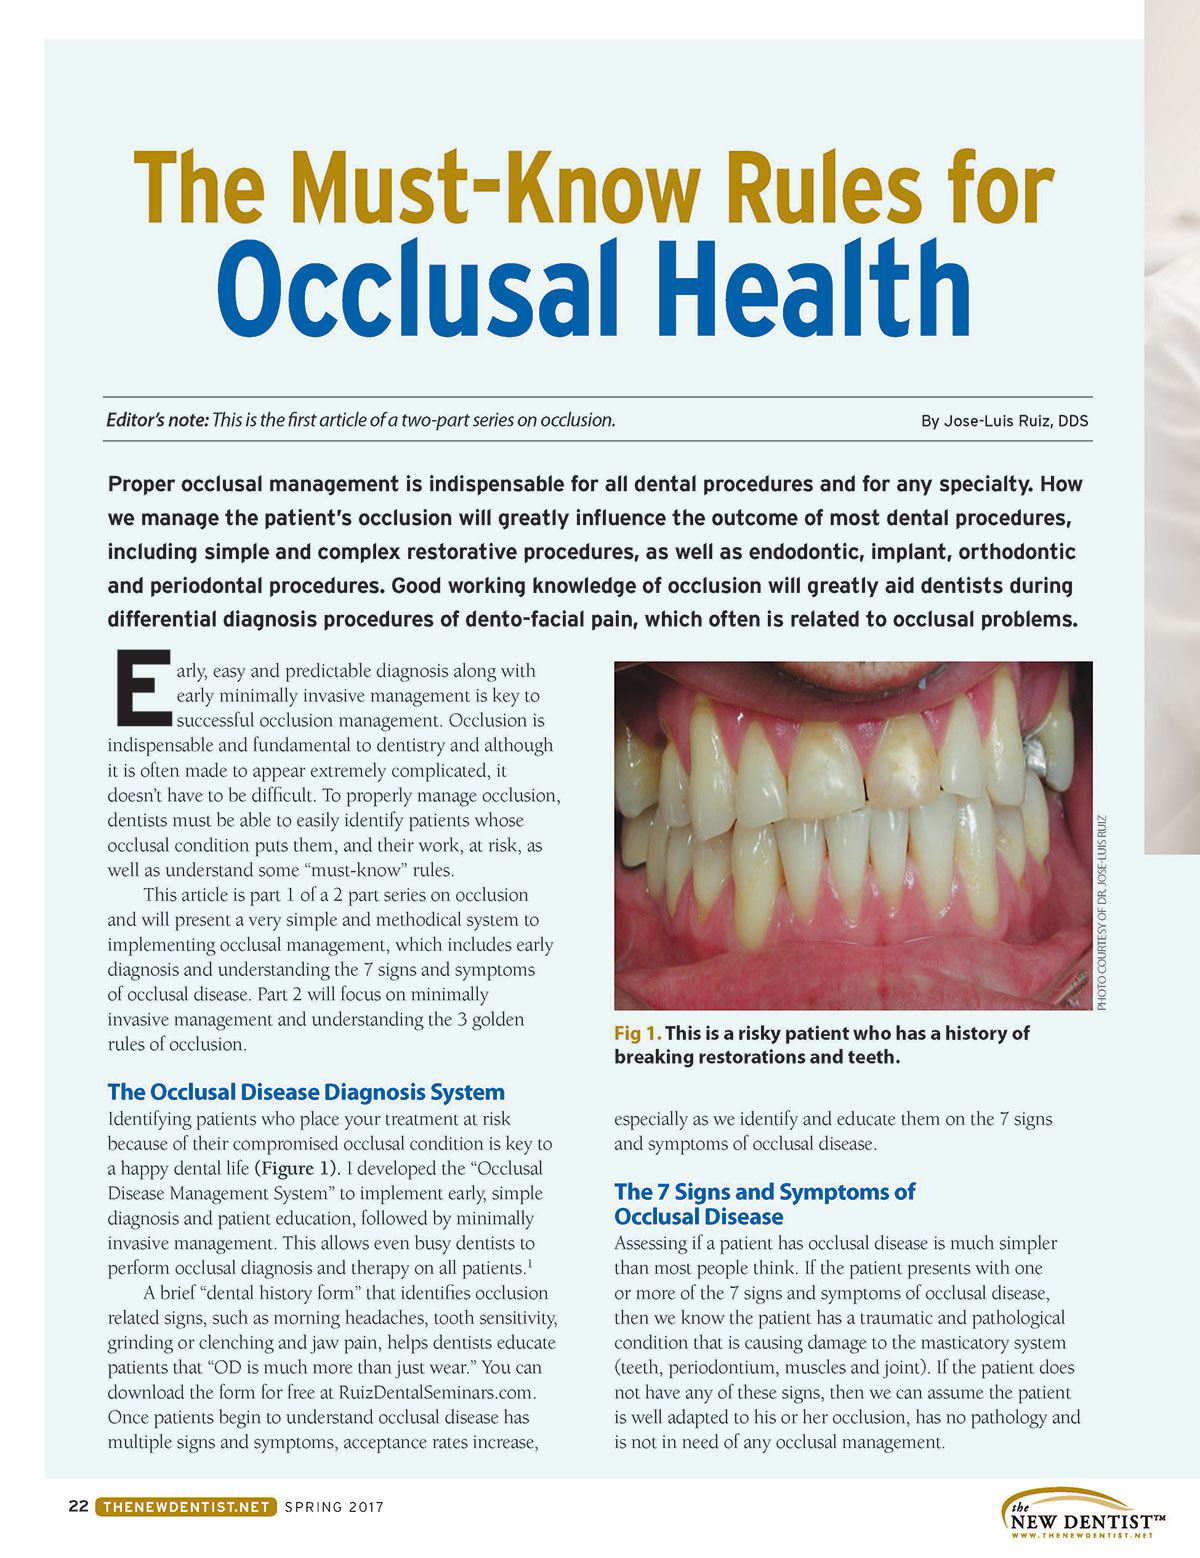 Article in The New Dentist magazine Spring 2017 by Doctor Ruiz